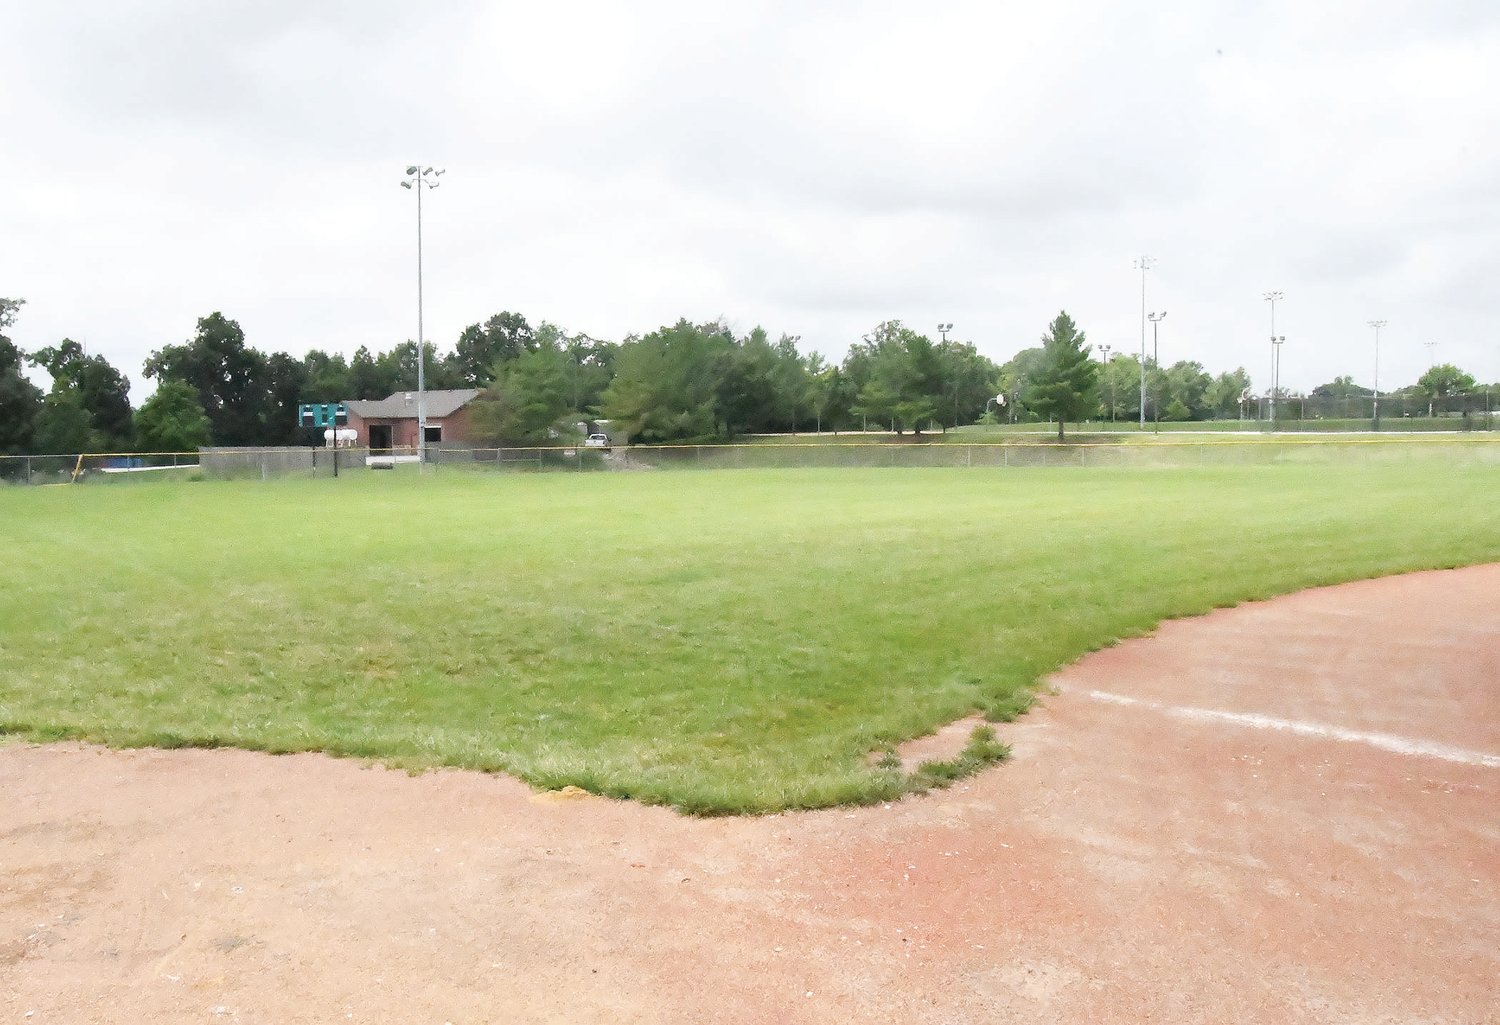 Howard Hils Athletic Complex’s Field Green No. 4 will be the new home for the Moberly Area Community College softball team. Next up, bids will be sent out to contractors for construction of the dugouts, bullpens and batting cages.